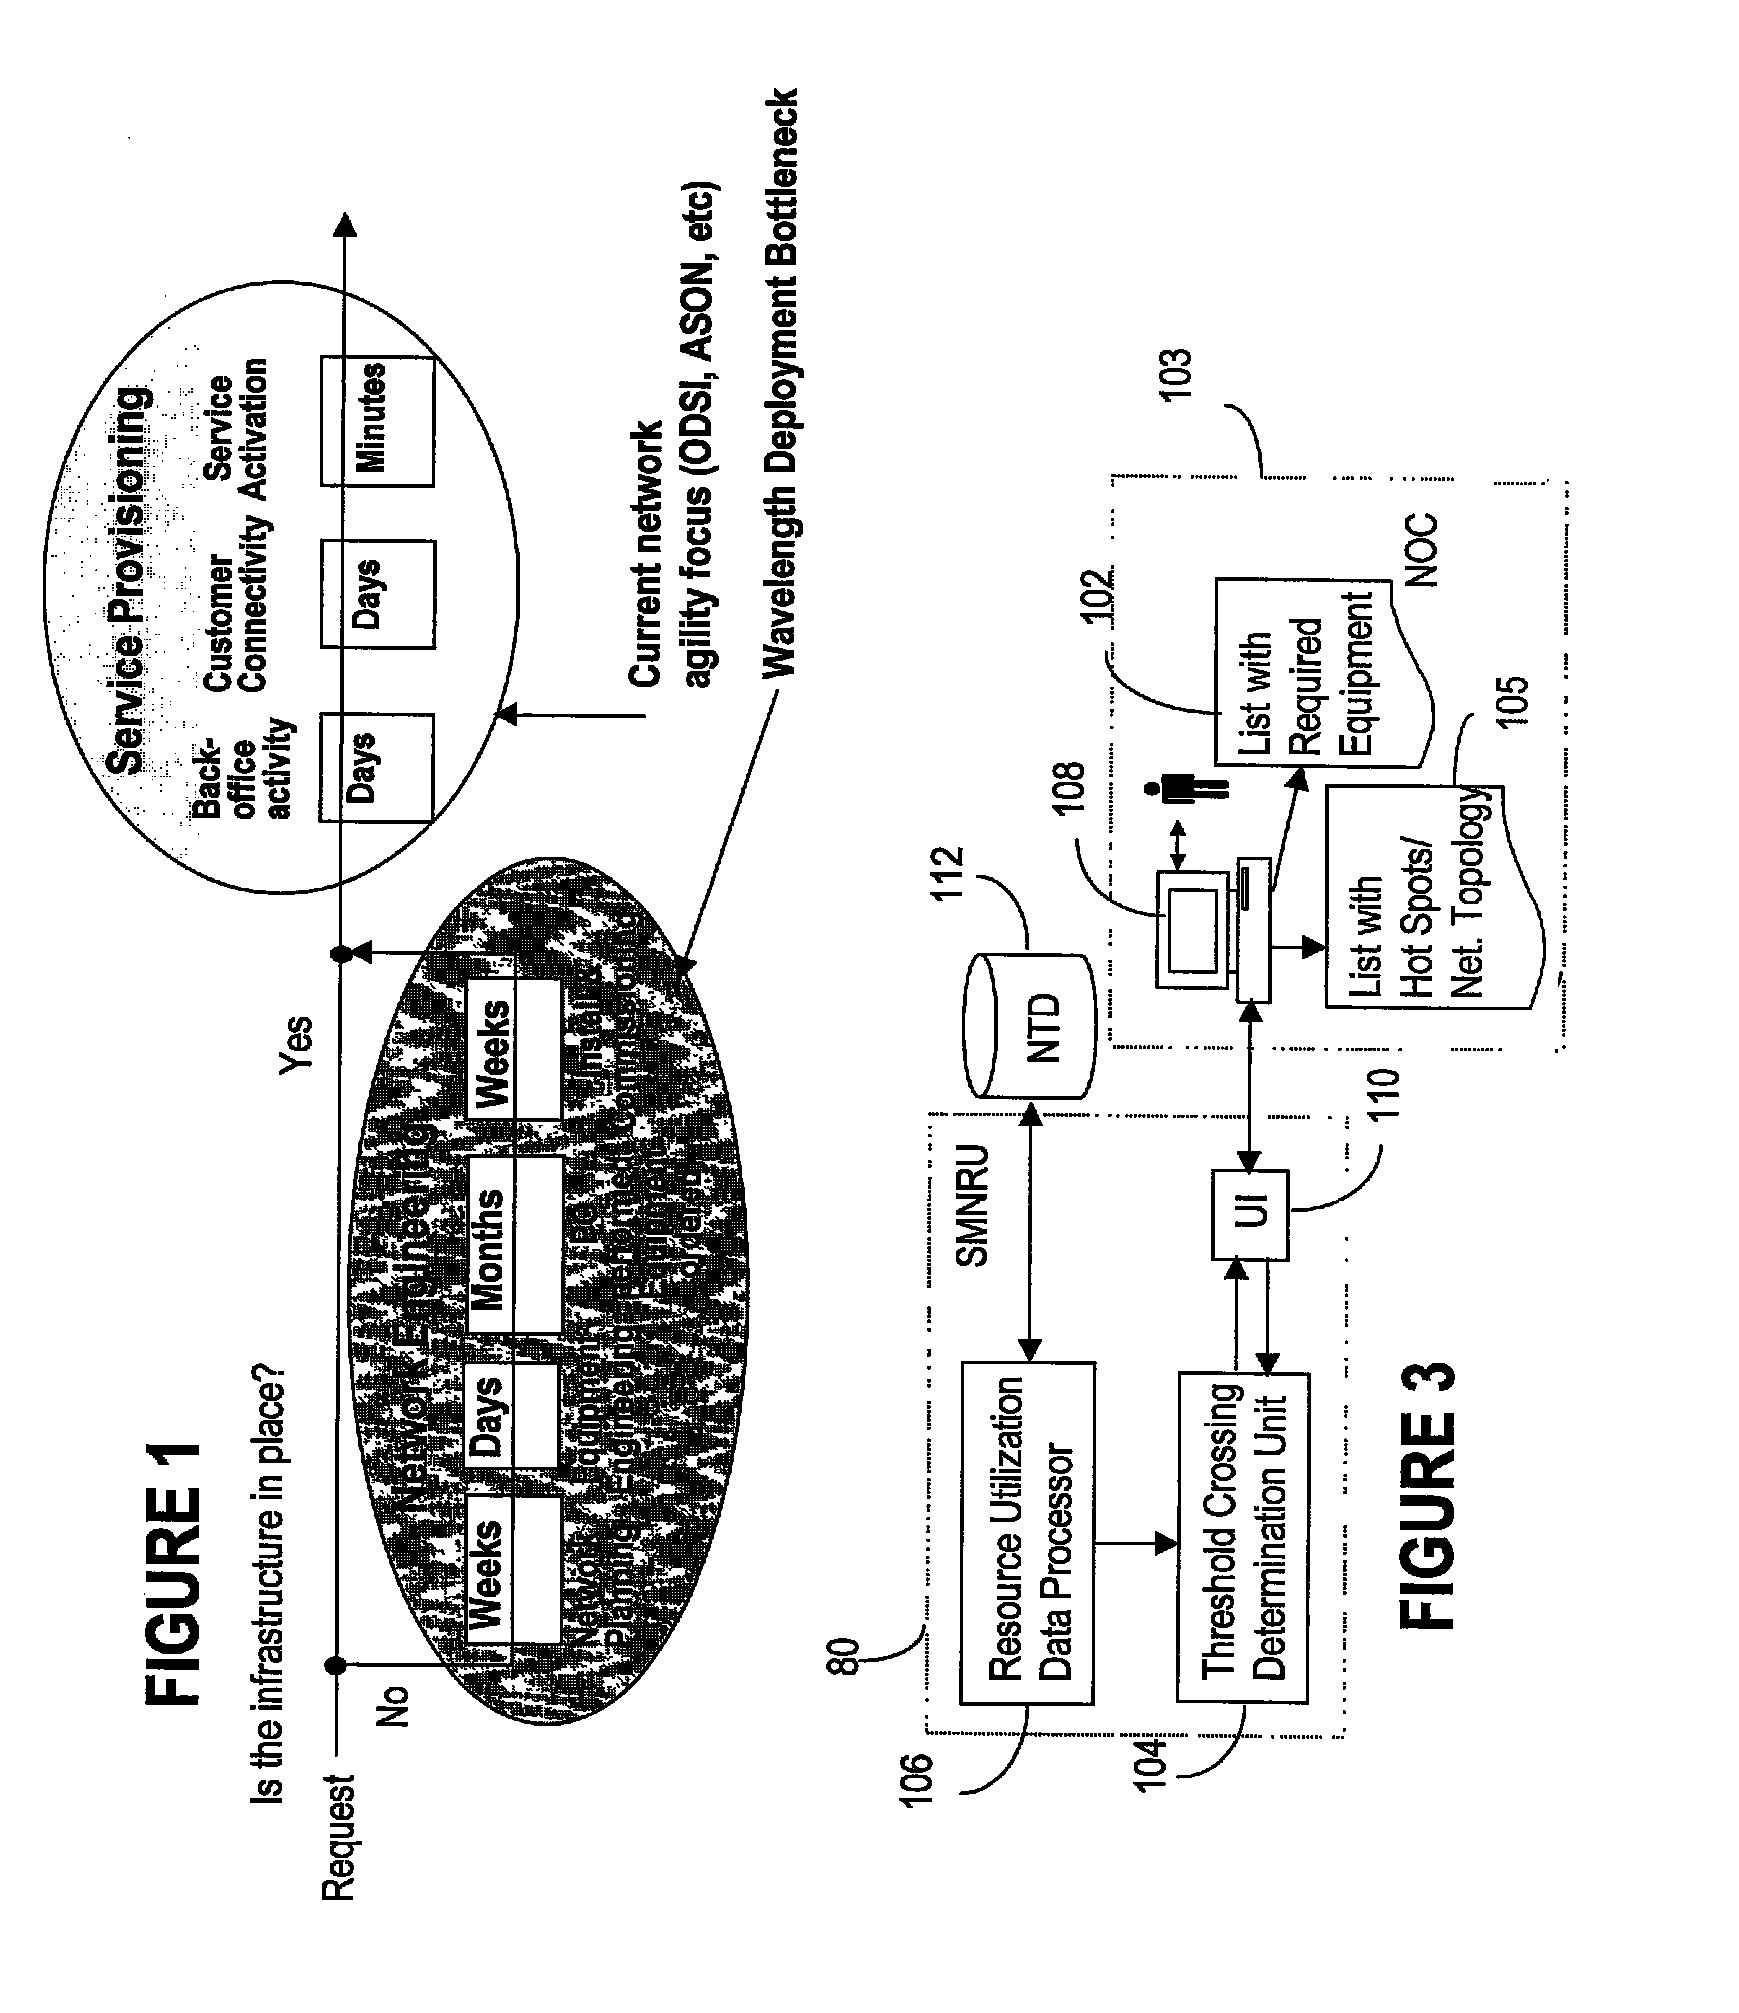 Method and system for monitoring network resources utilization